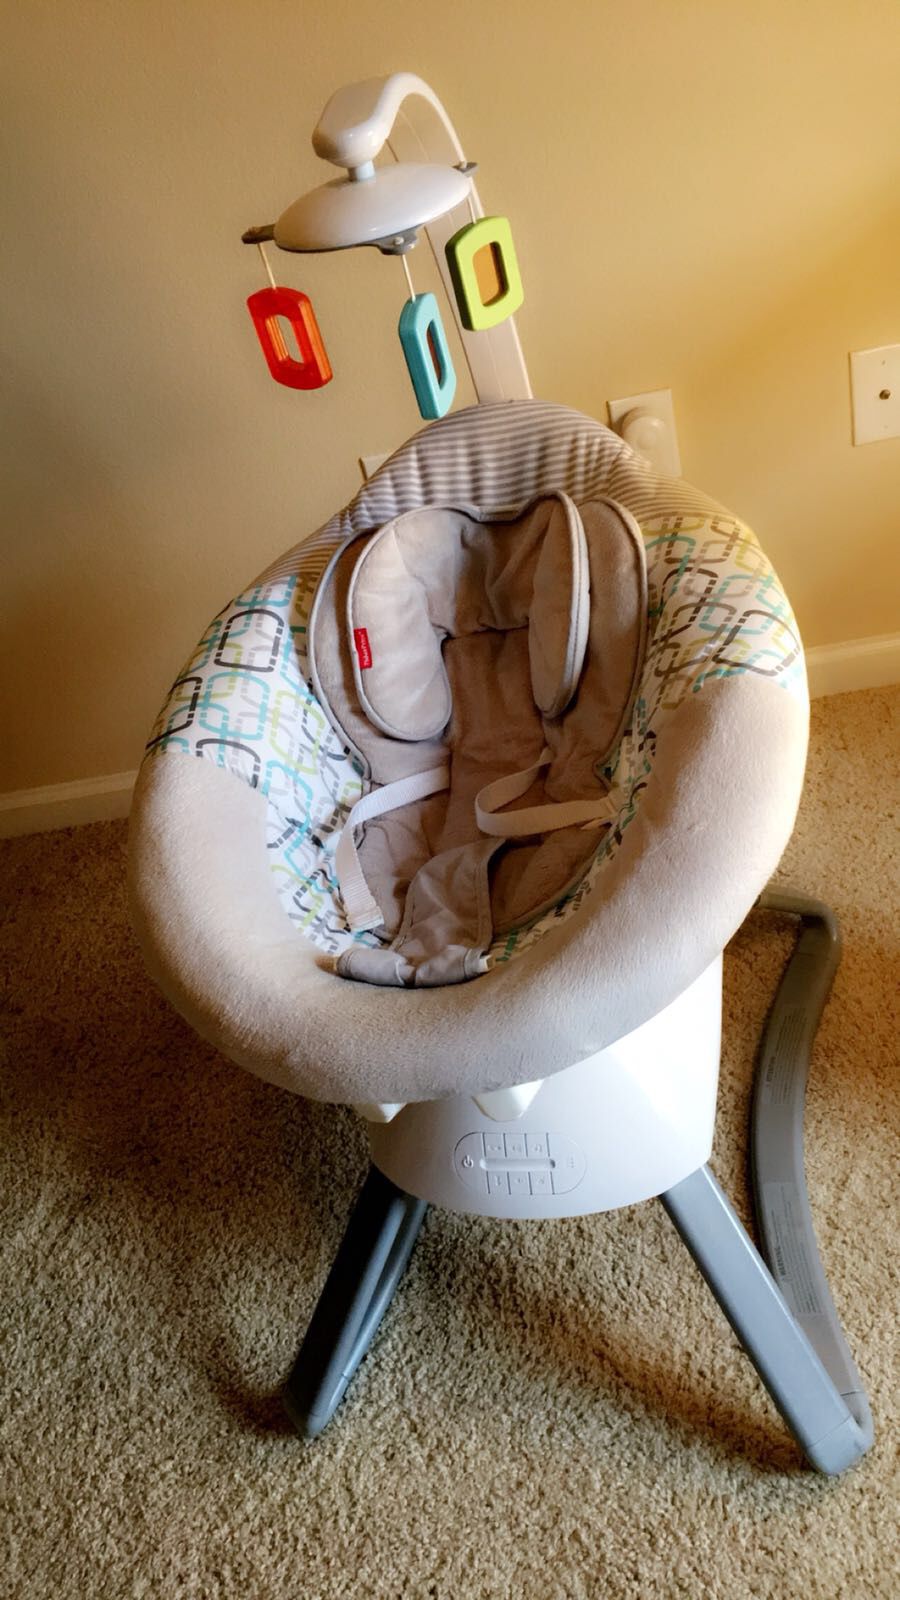 Fisher-Price Soothing baby swing seat like new condition